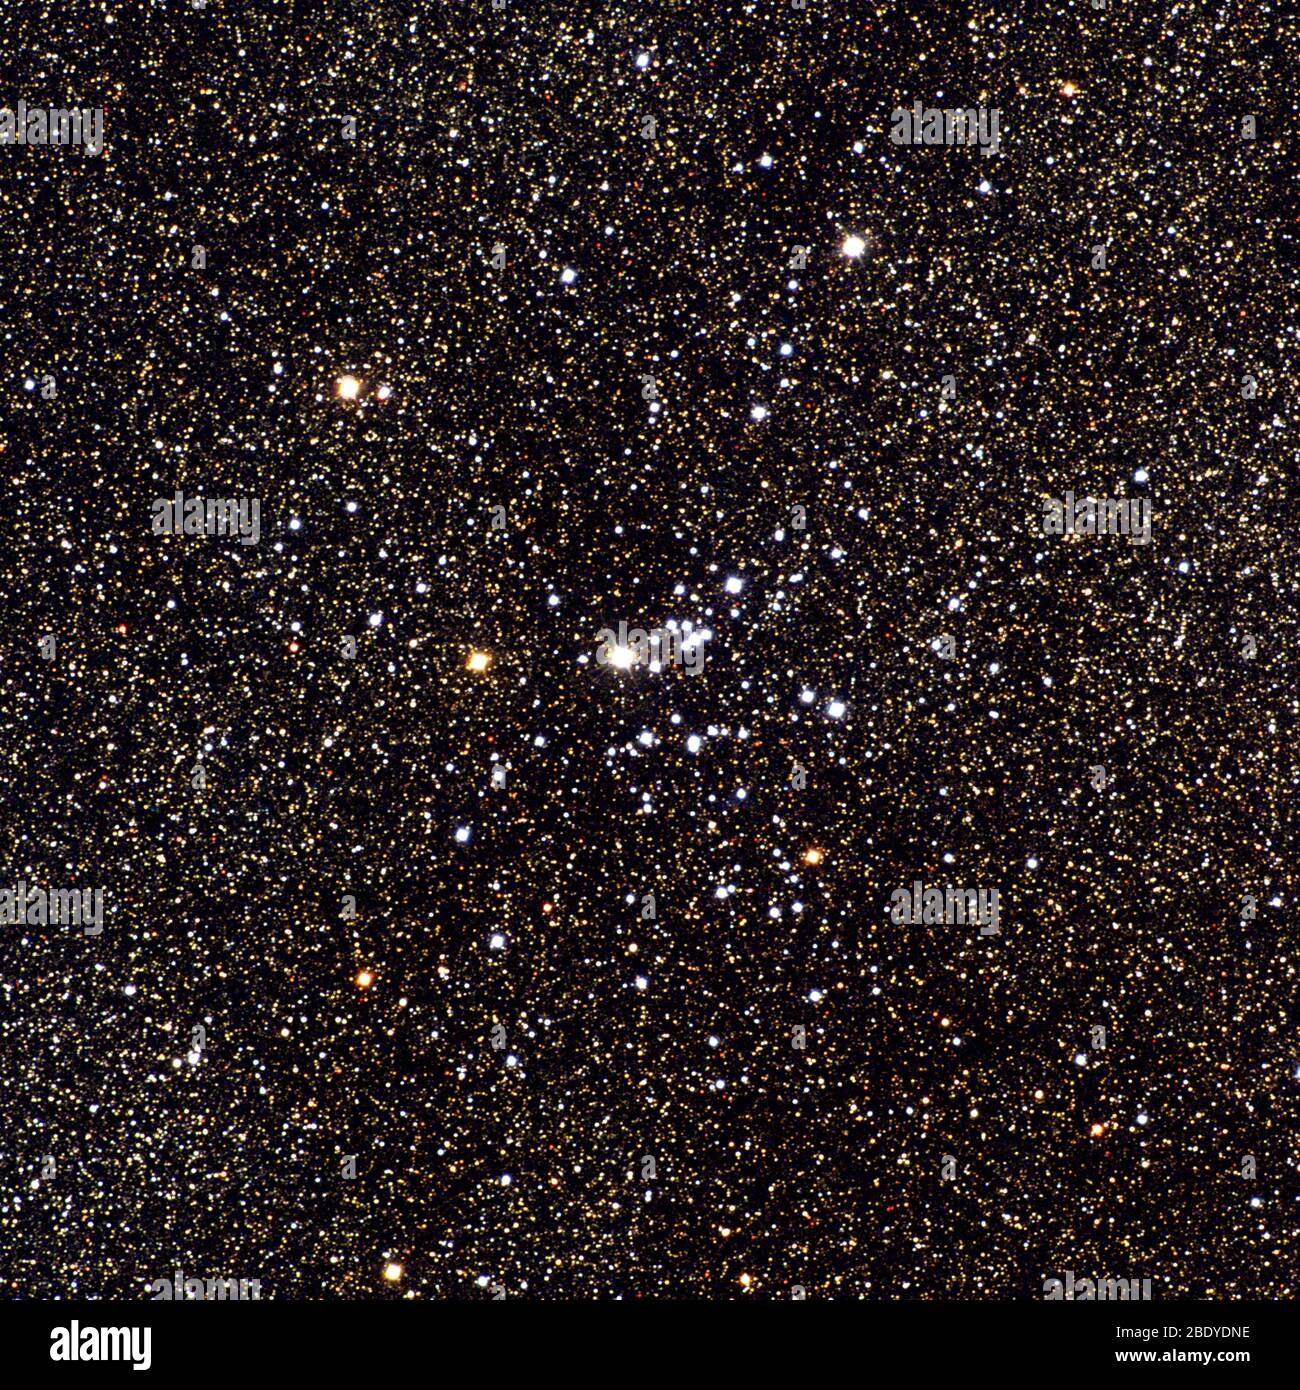 Open Star Cluster, M25, IC 4725 Stockfoto